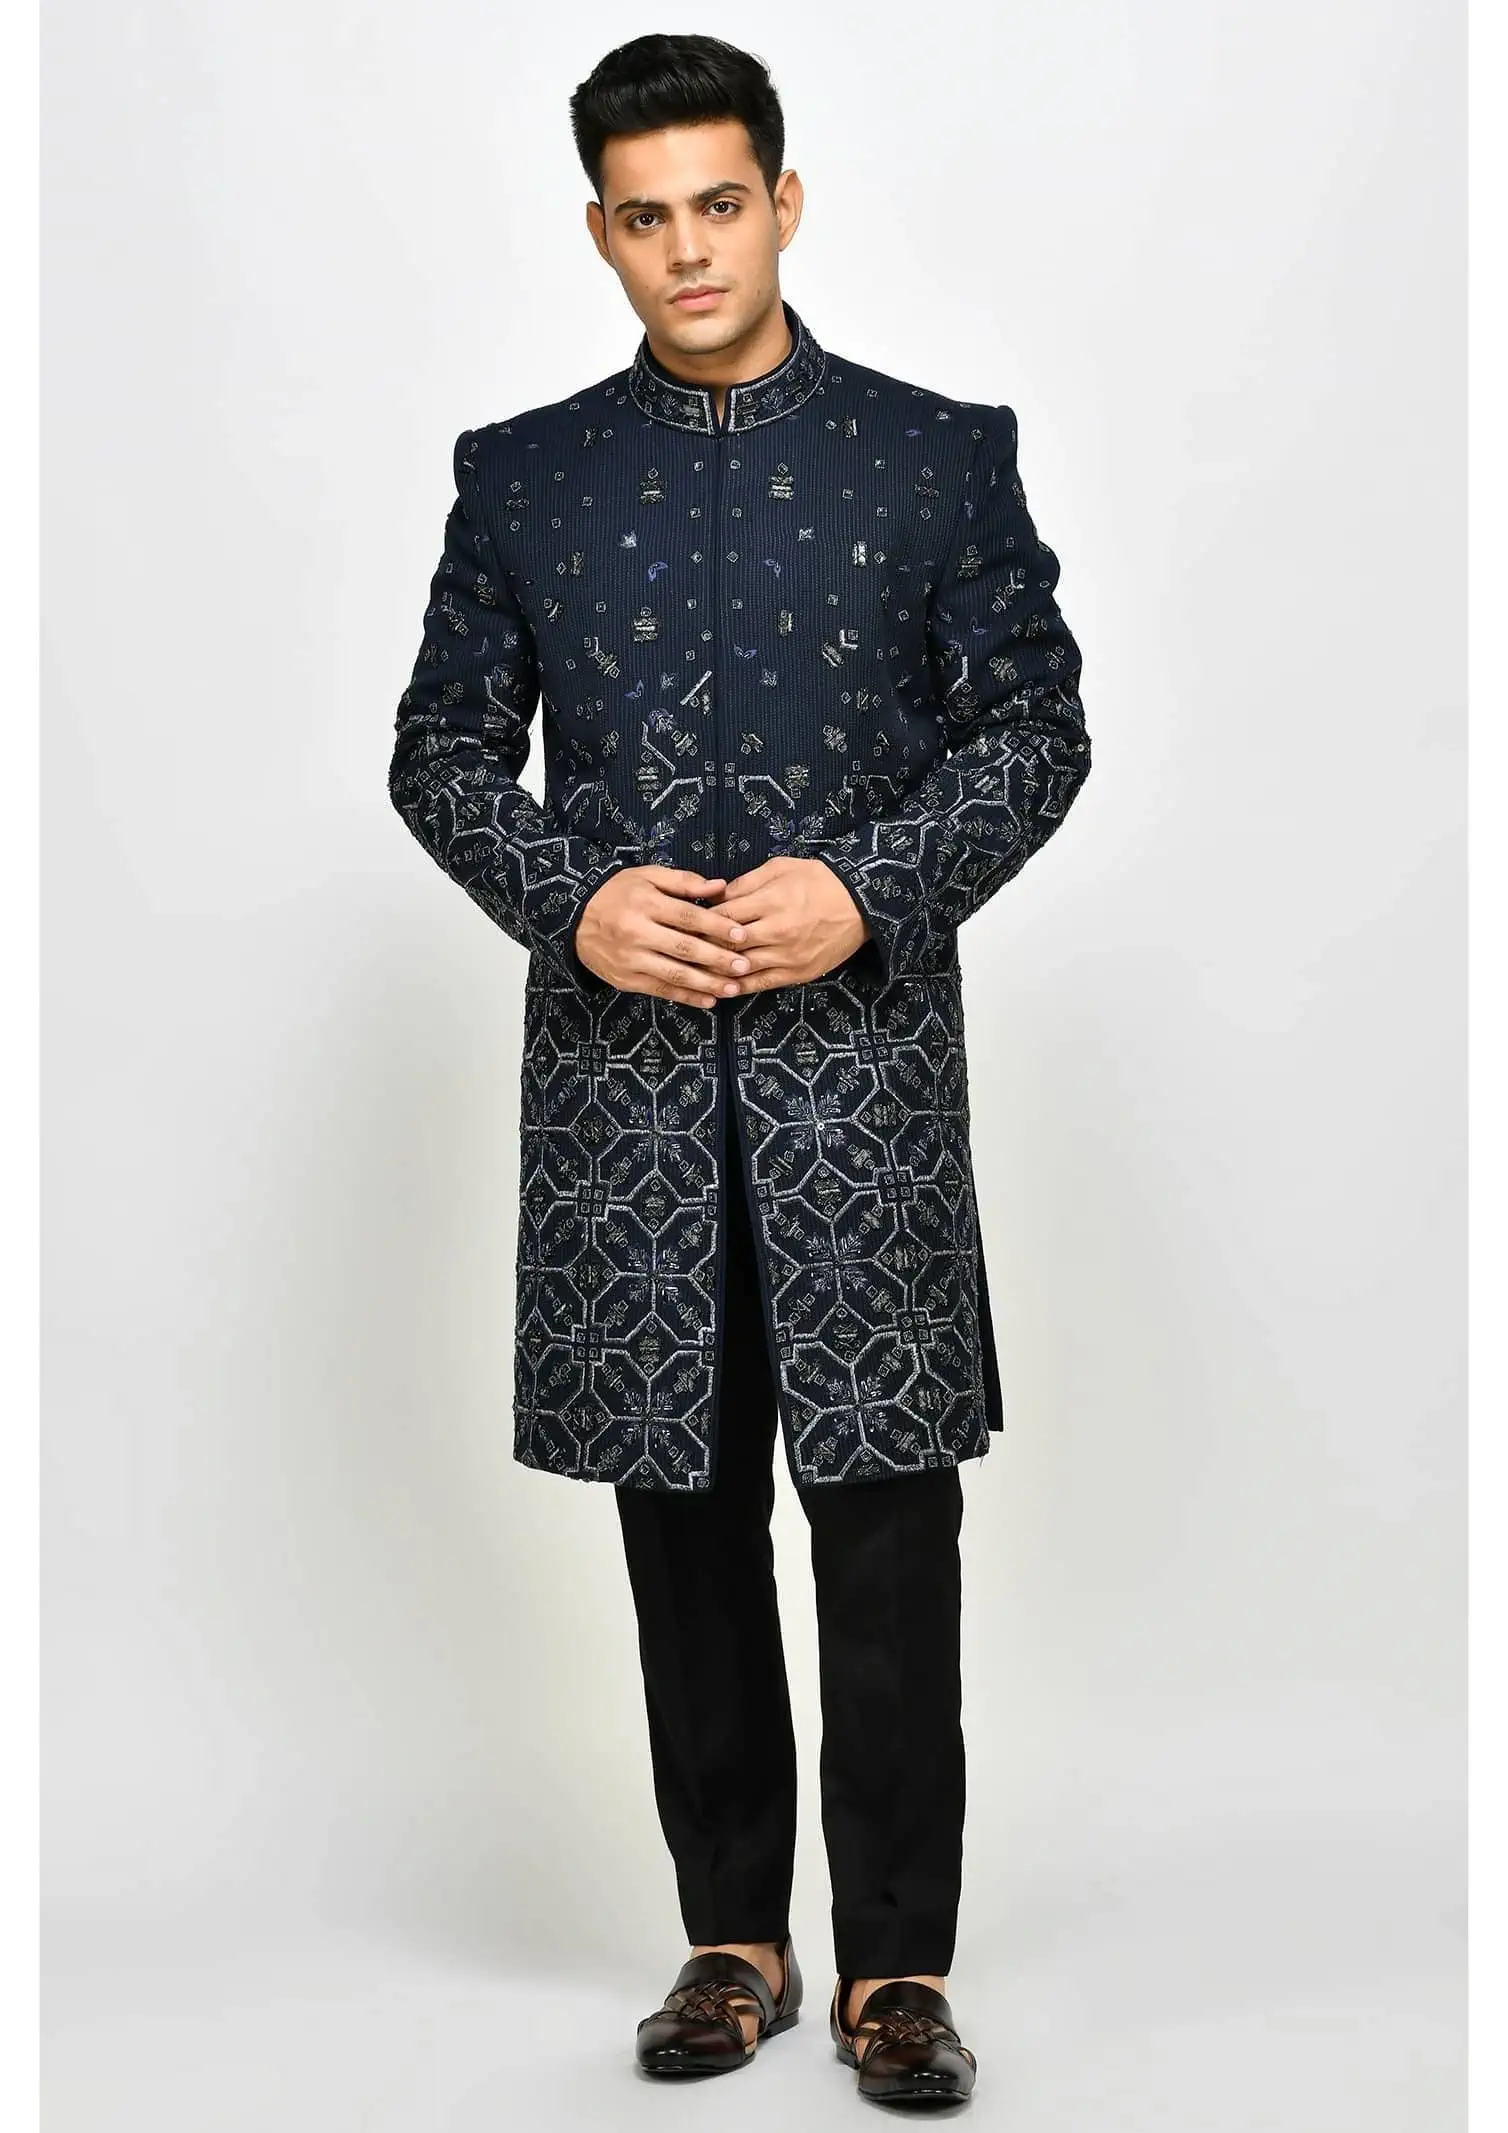 Hand Embroidery At its Best - Achkan for men